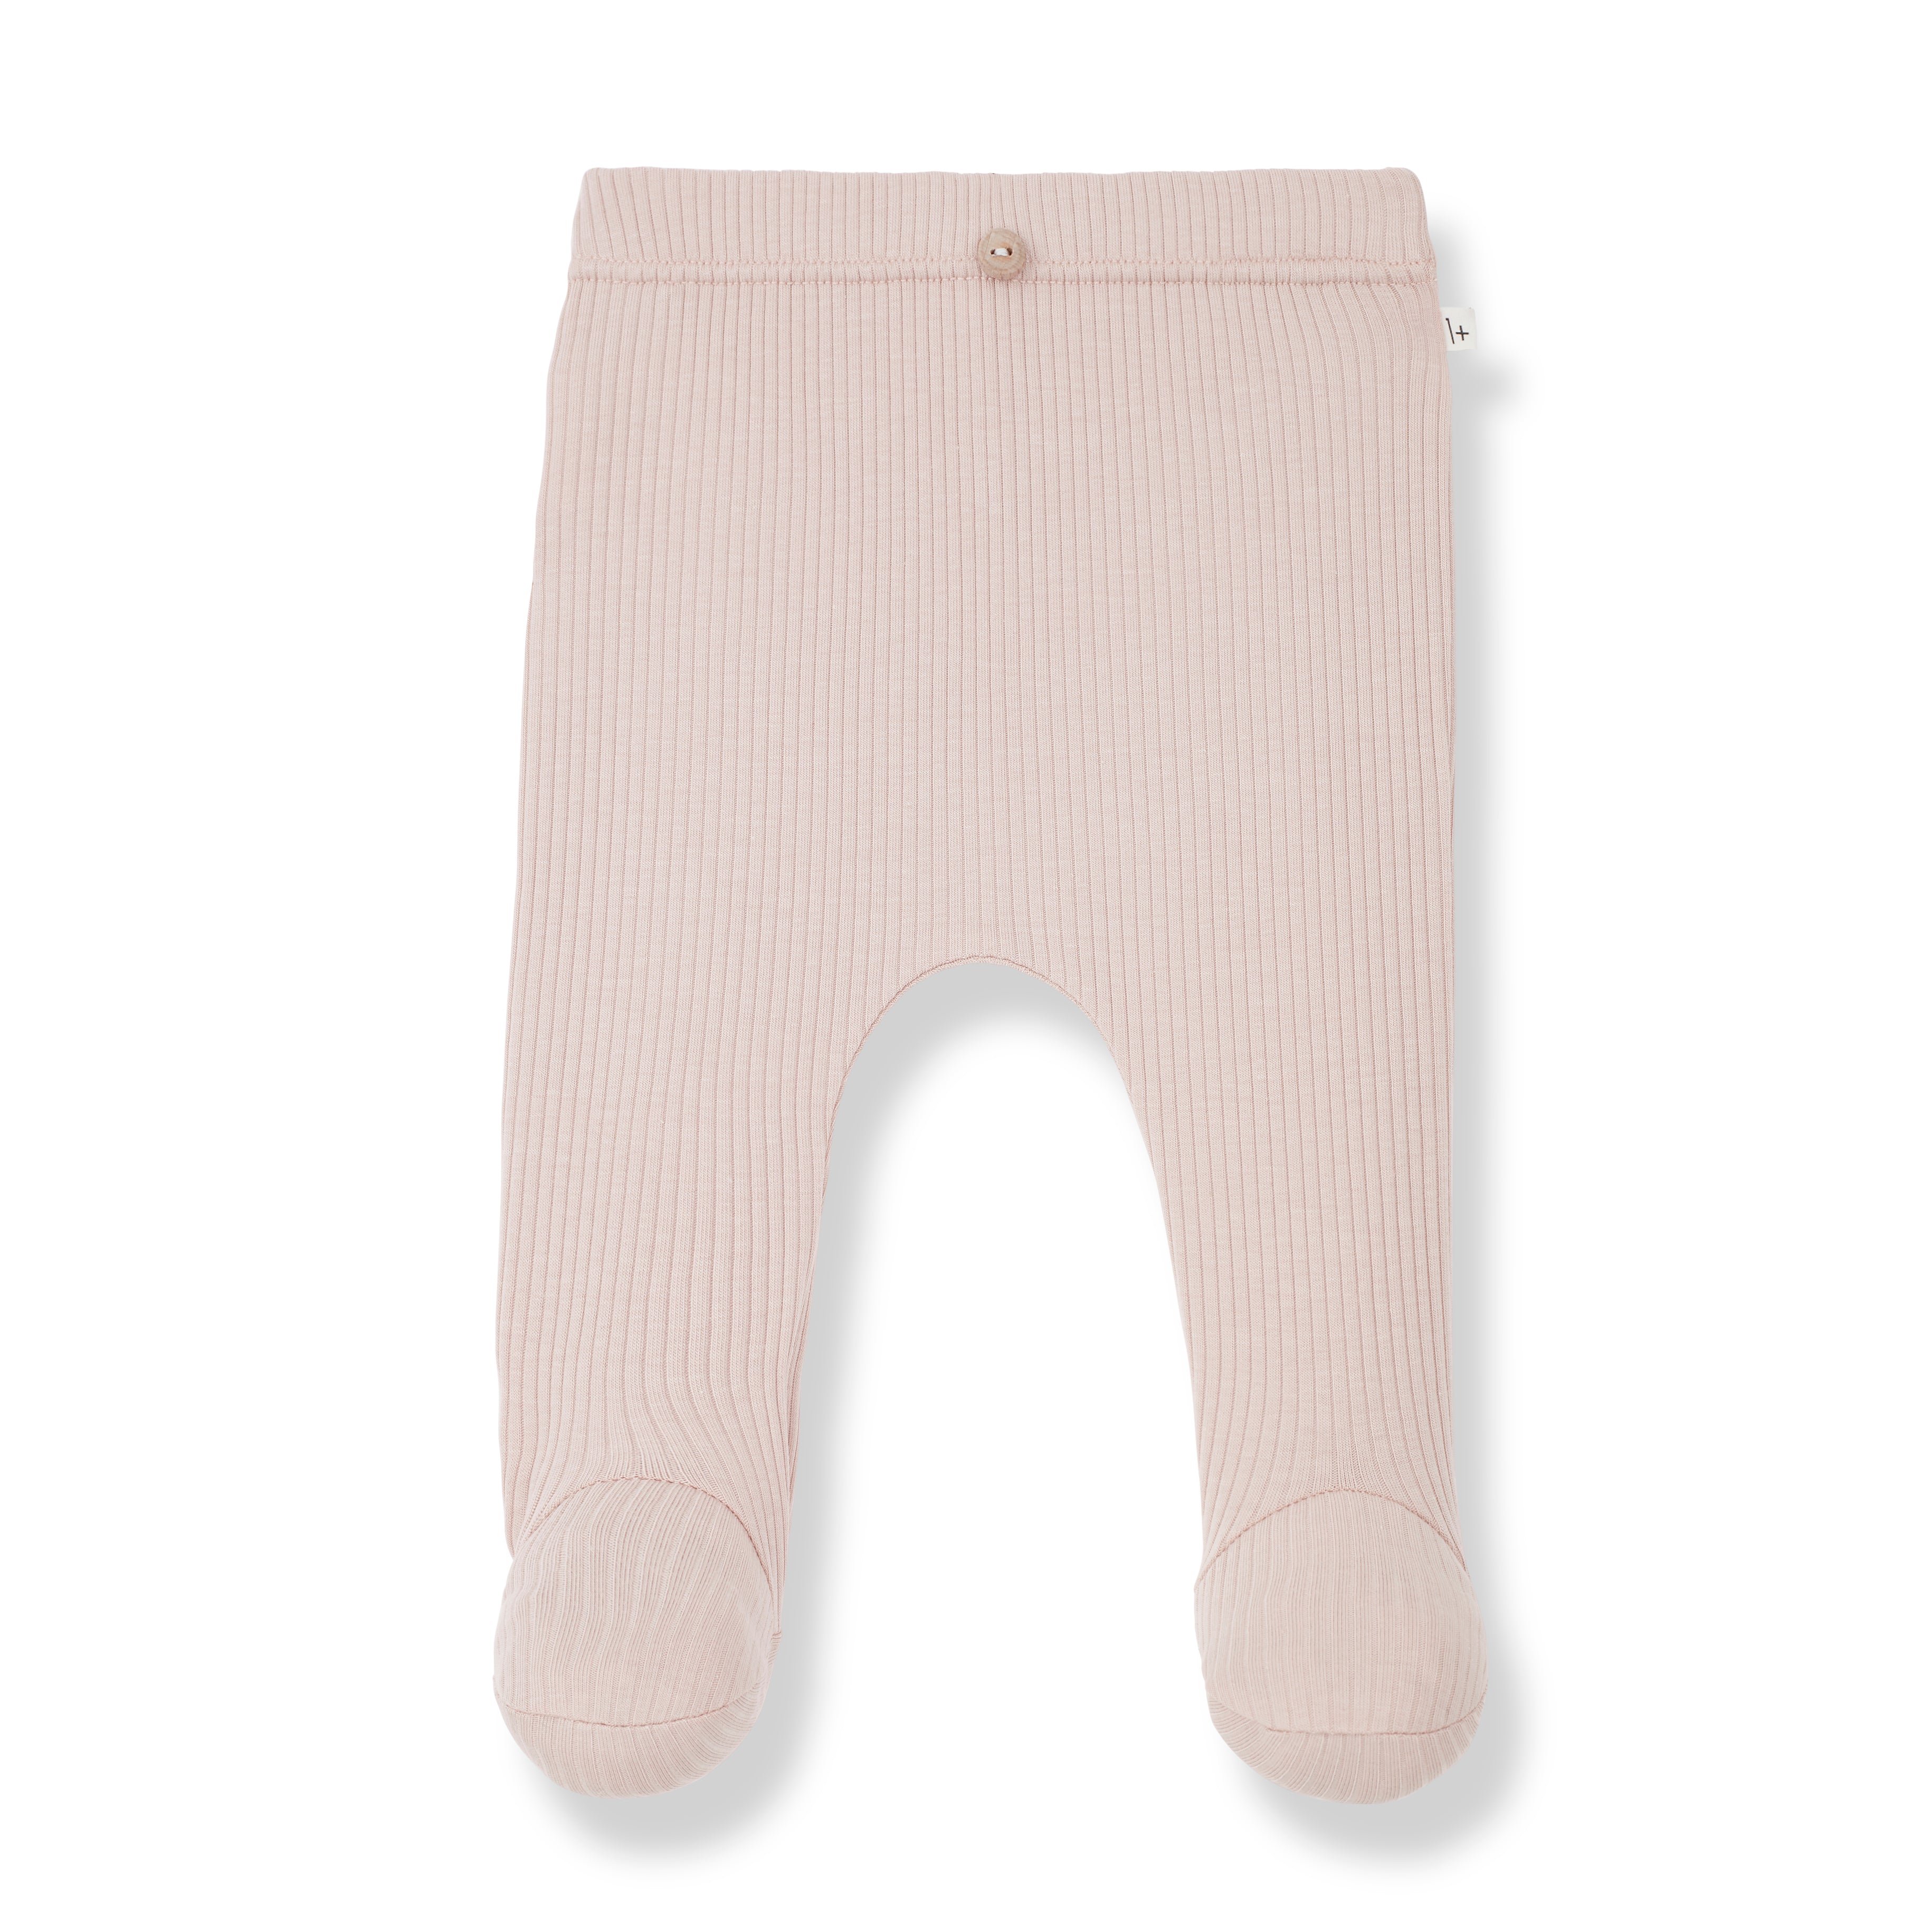 Baby Legging with Feet | Organic Cotton | Your Little One UK